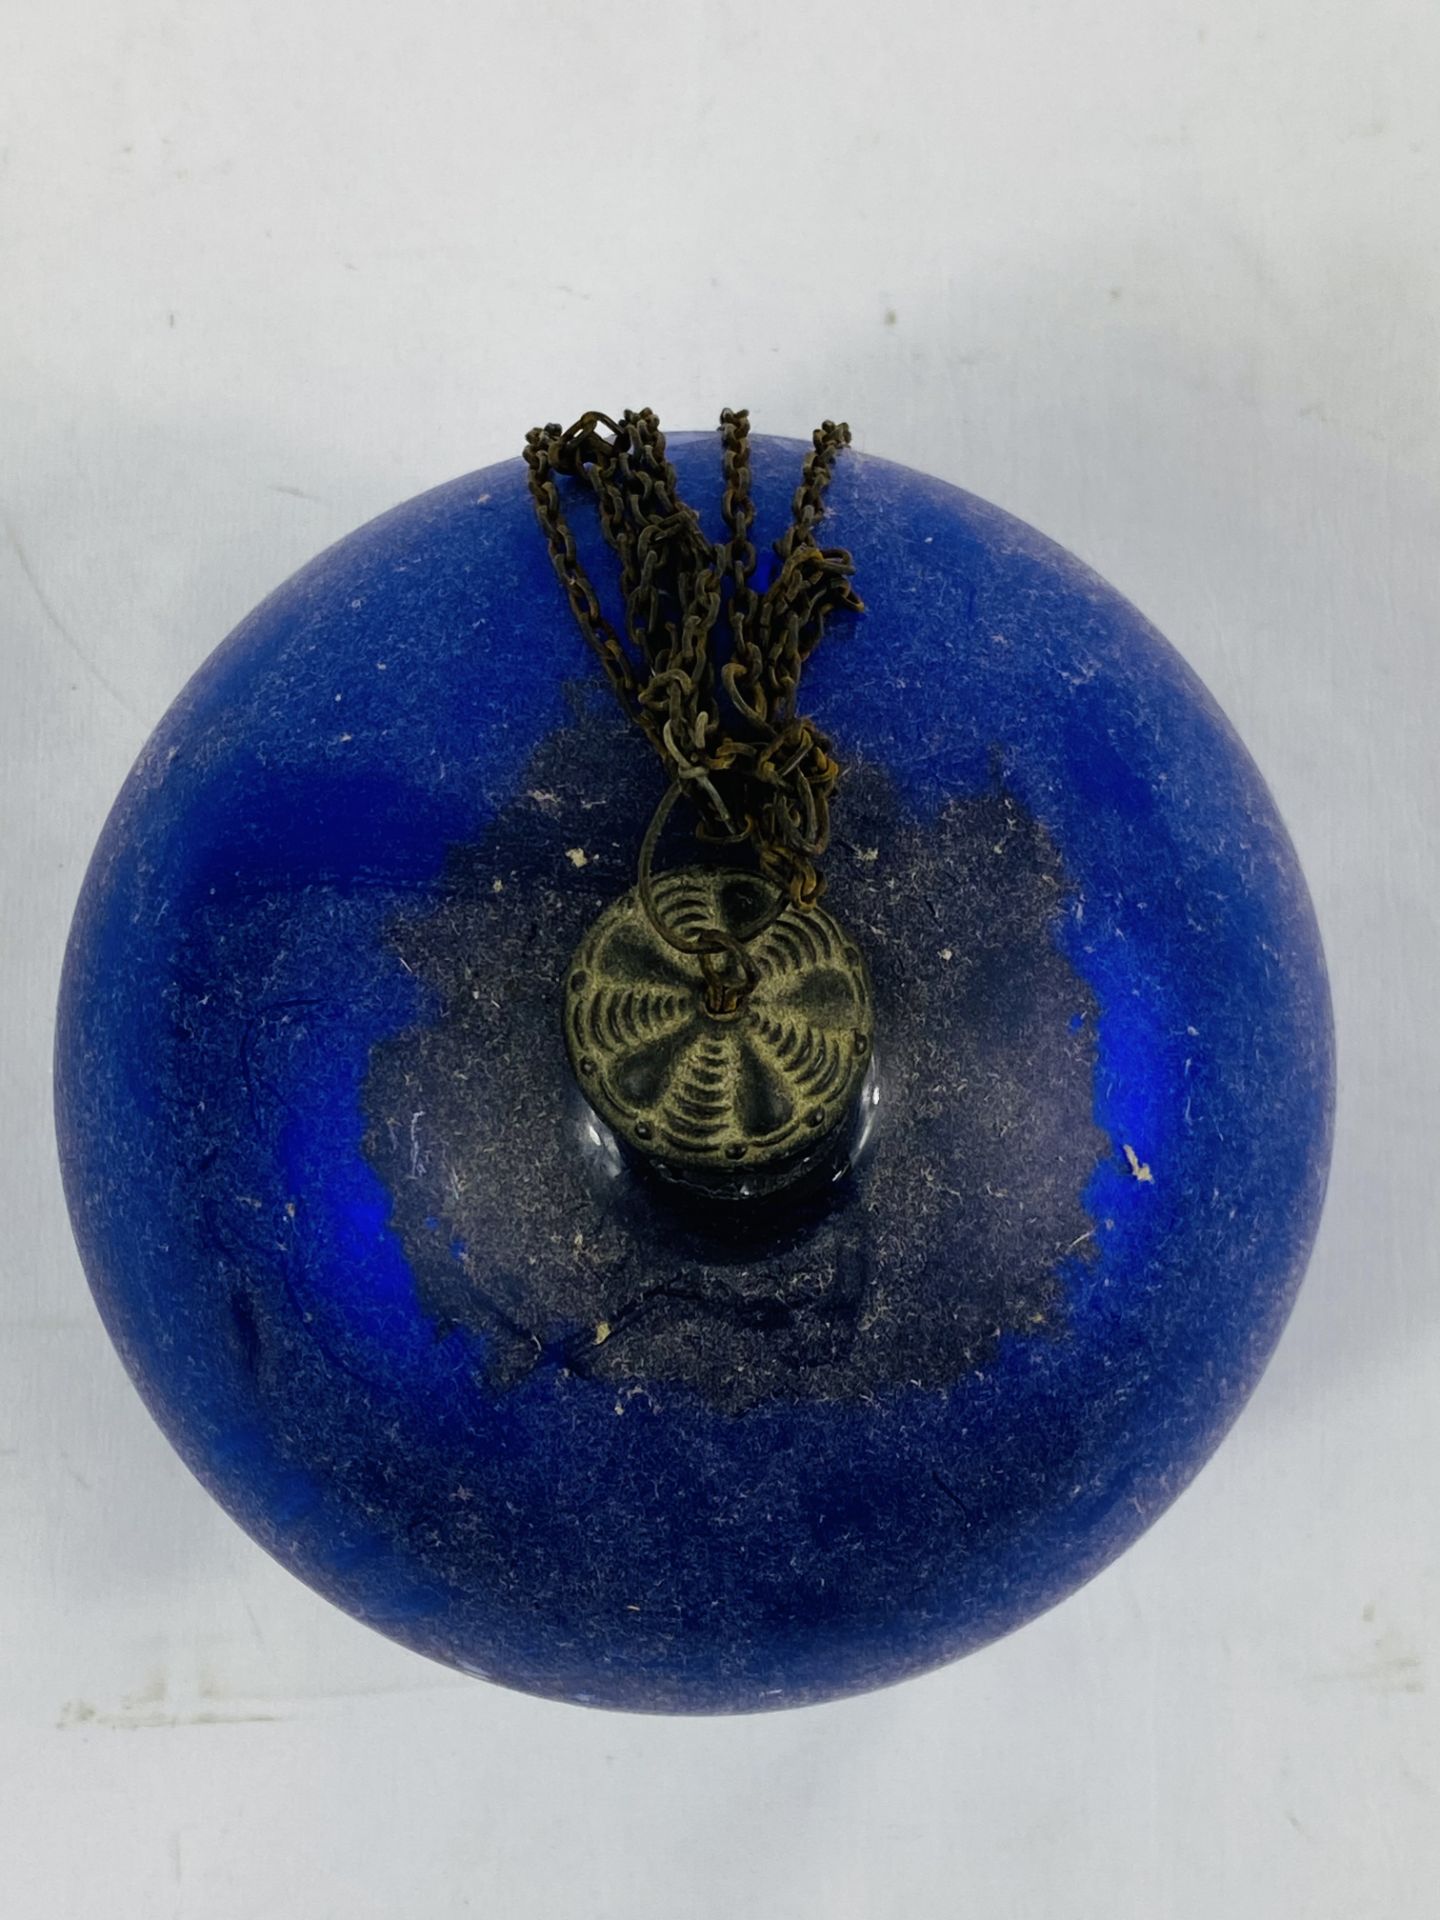 Blue mirrored glass witches ball - Image 4 of 6